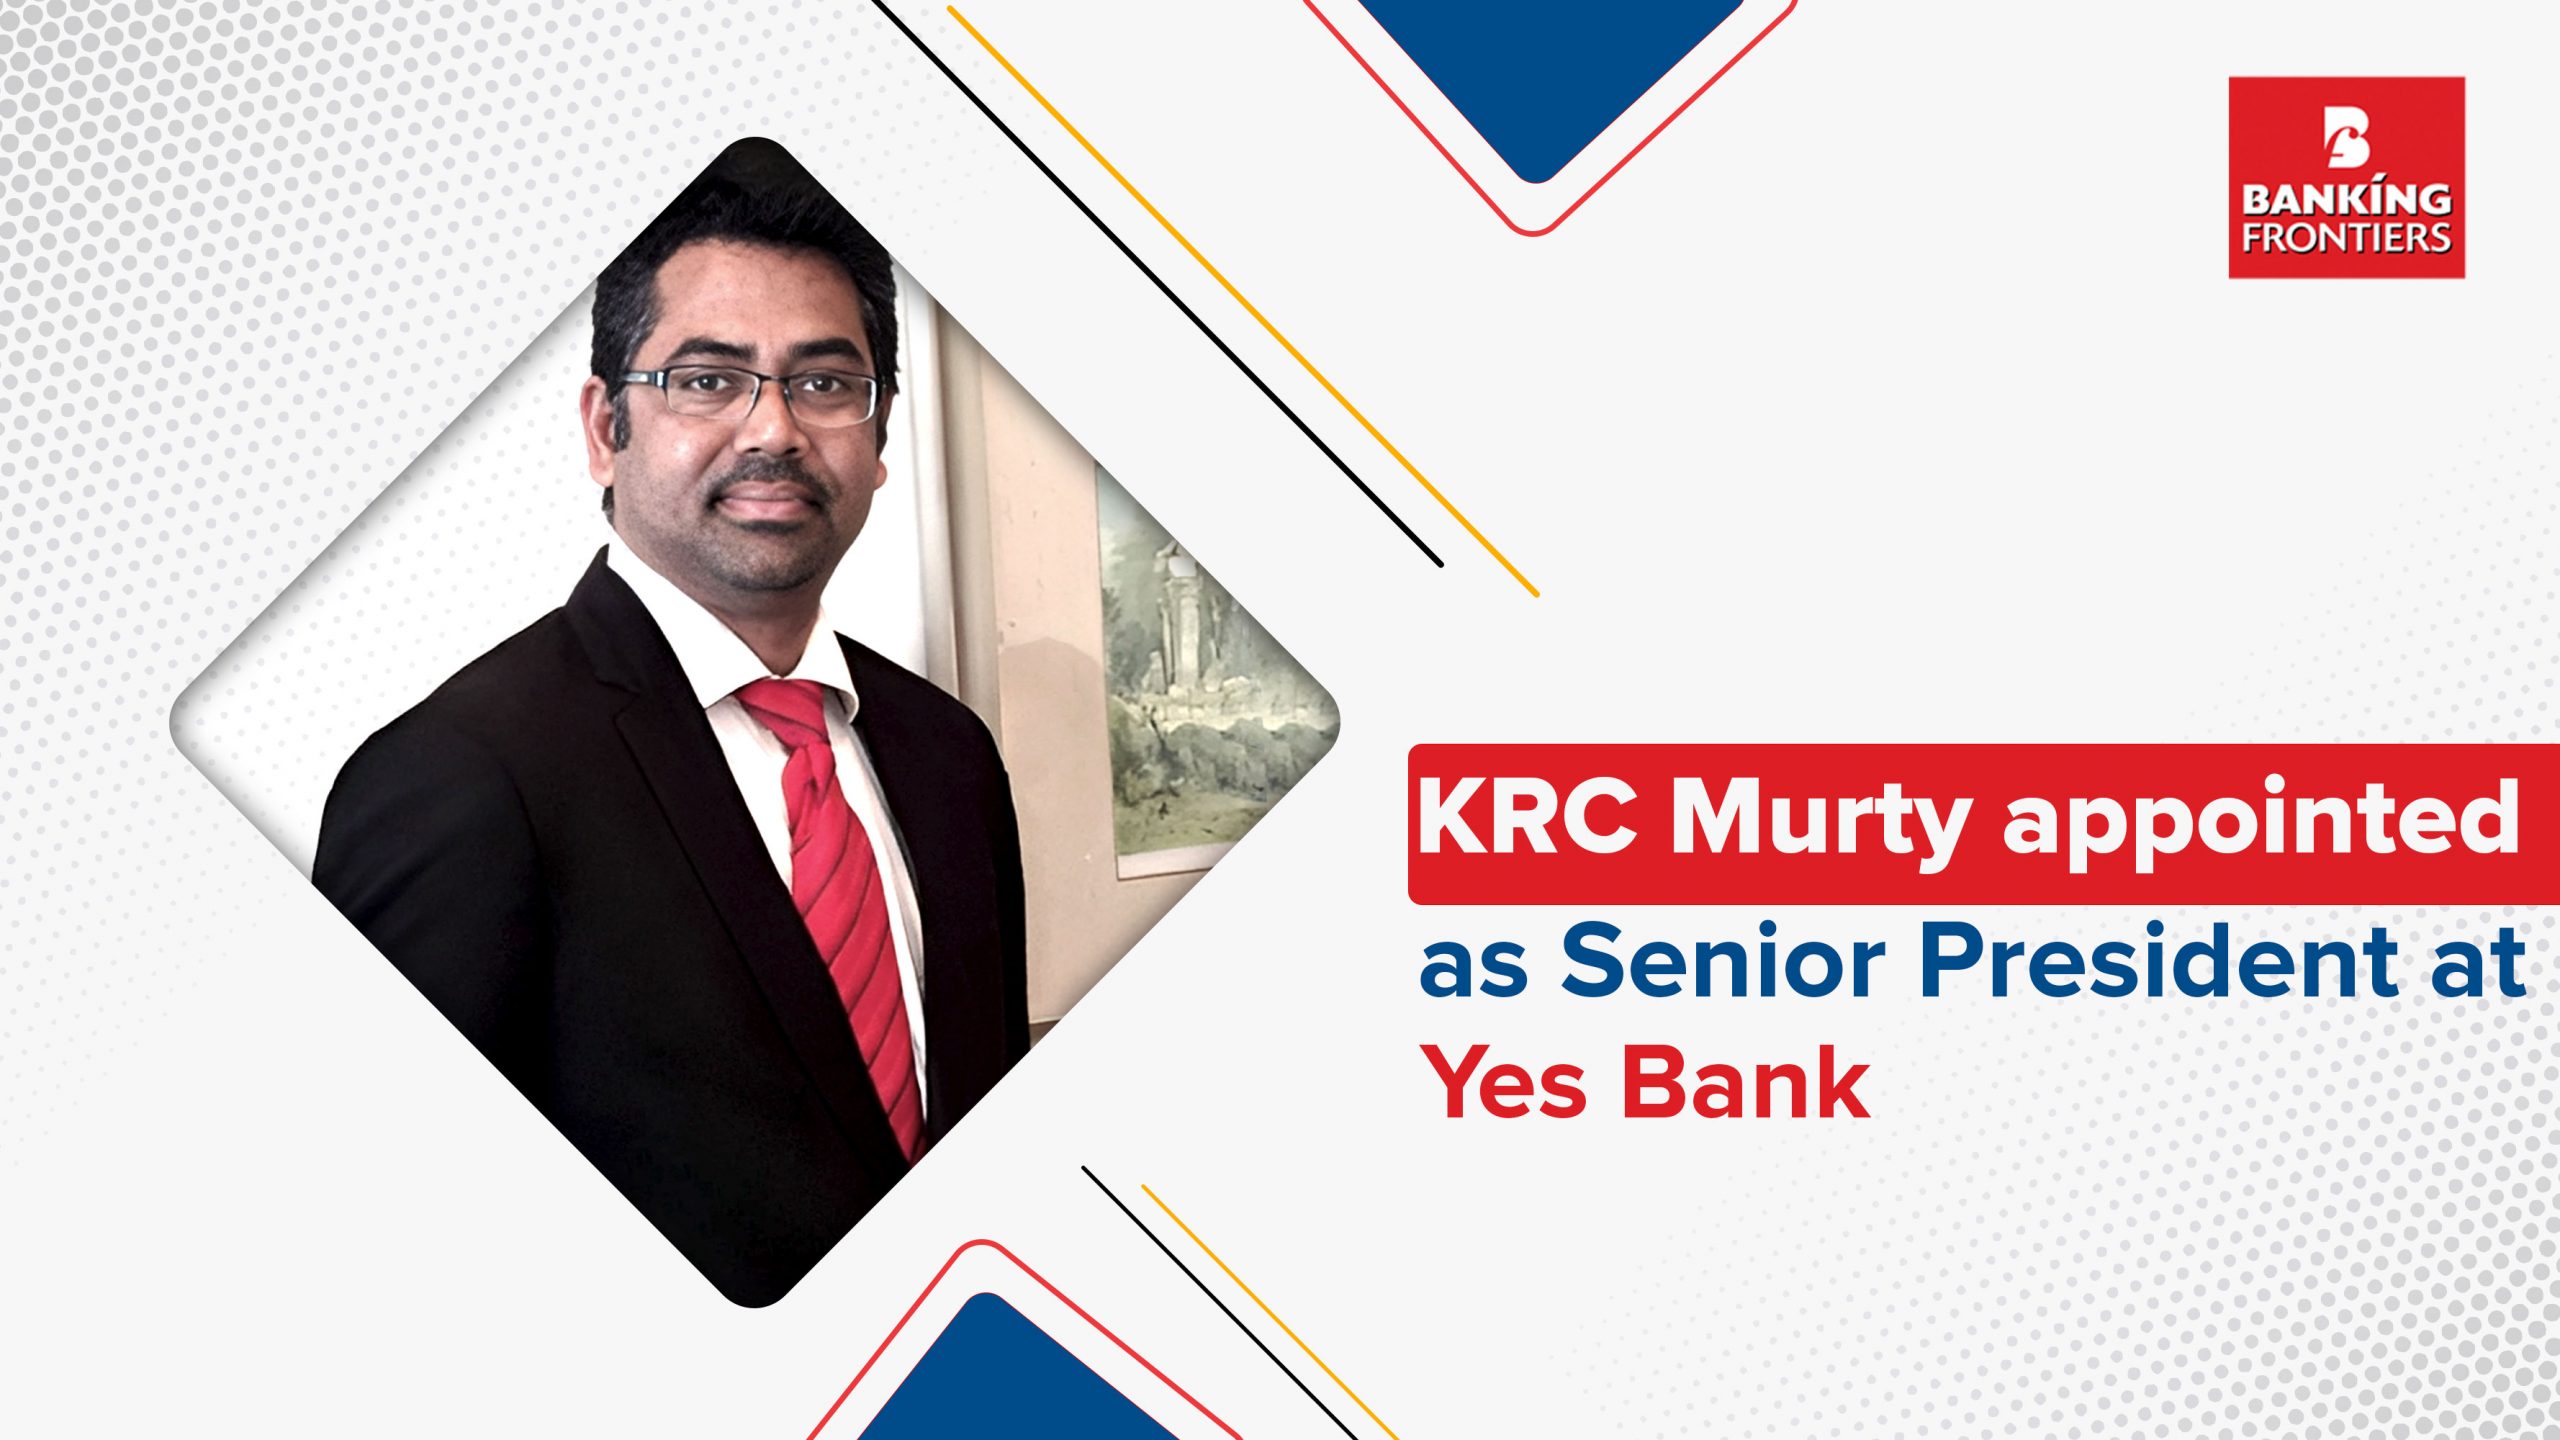 KRC Murty appointed as Senior President at YES Bank